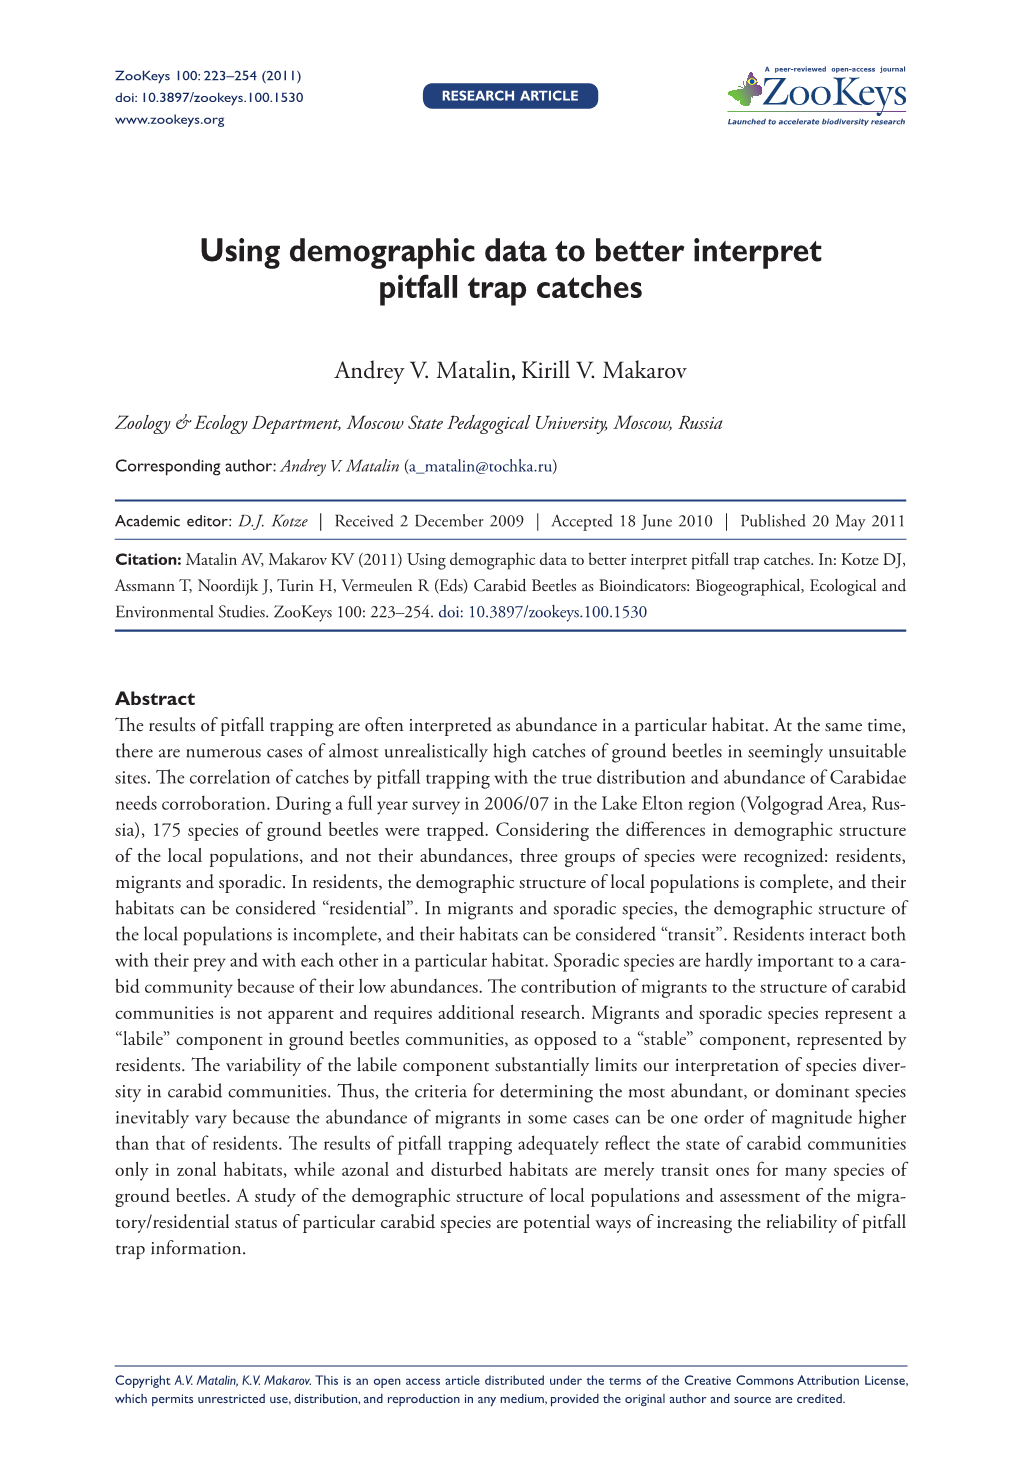 Using Demographic Data to Better Interpret Pitfall Trap Catches